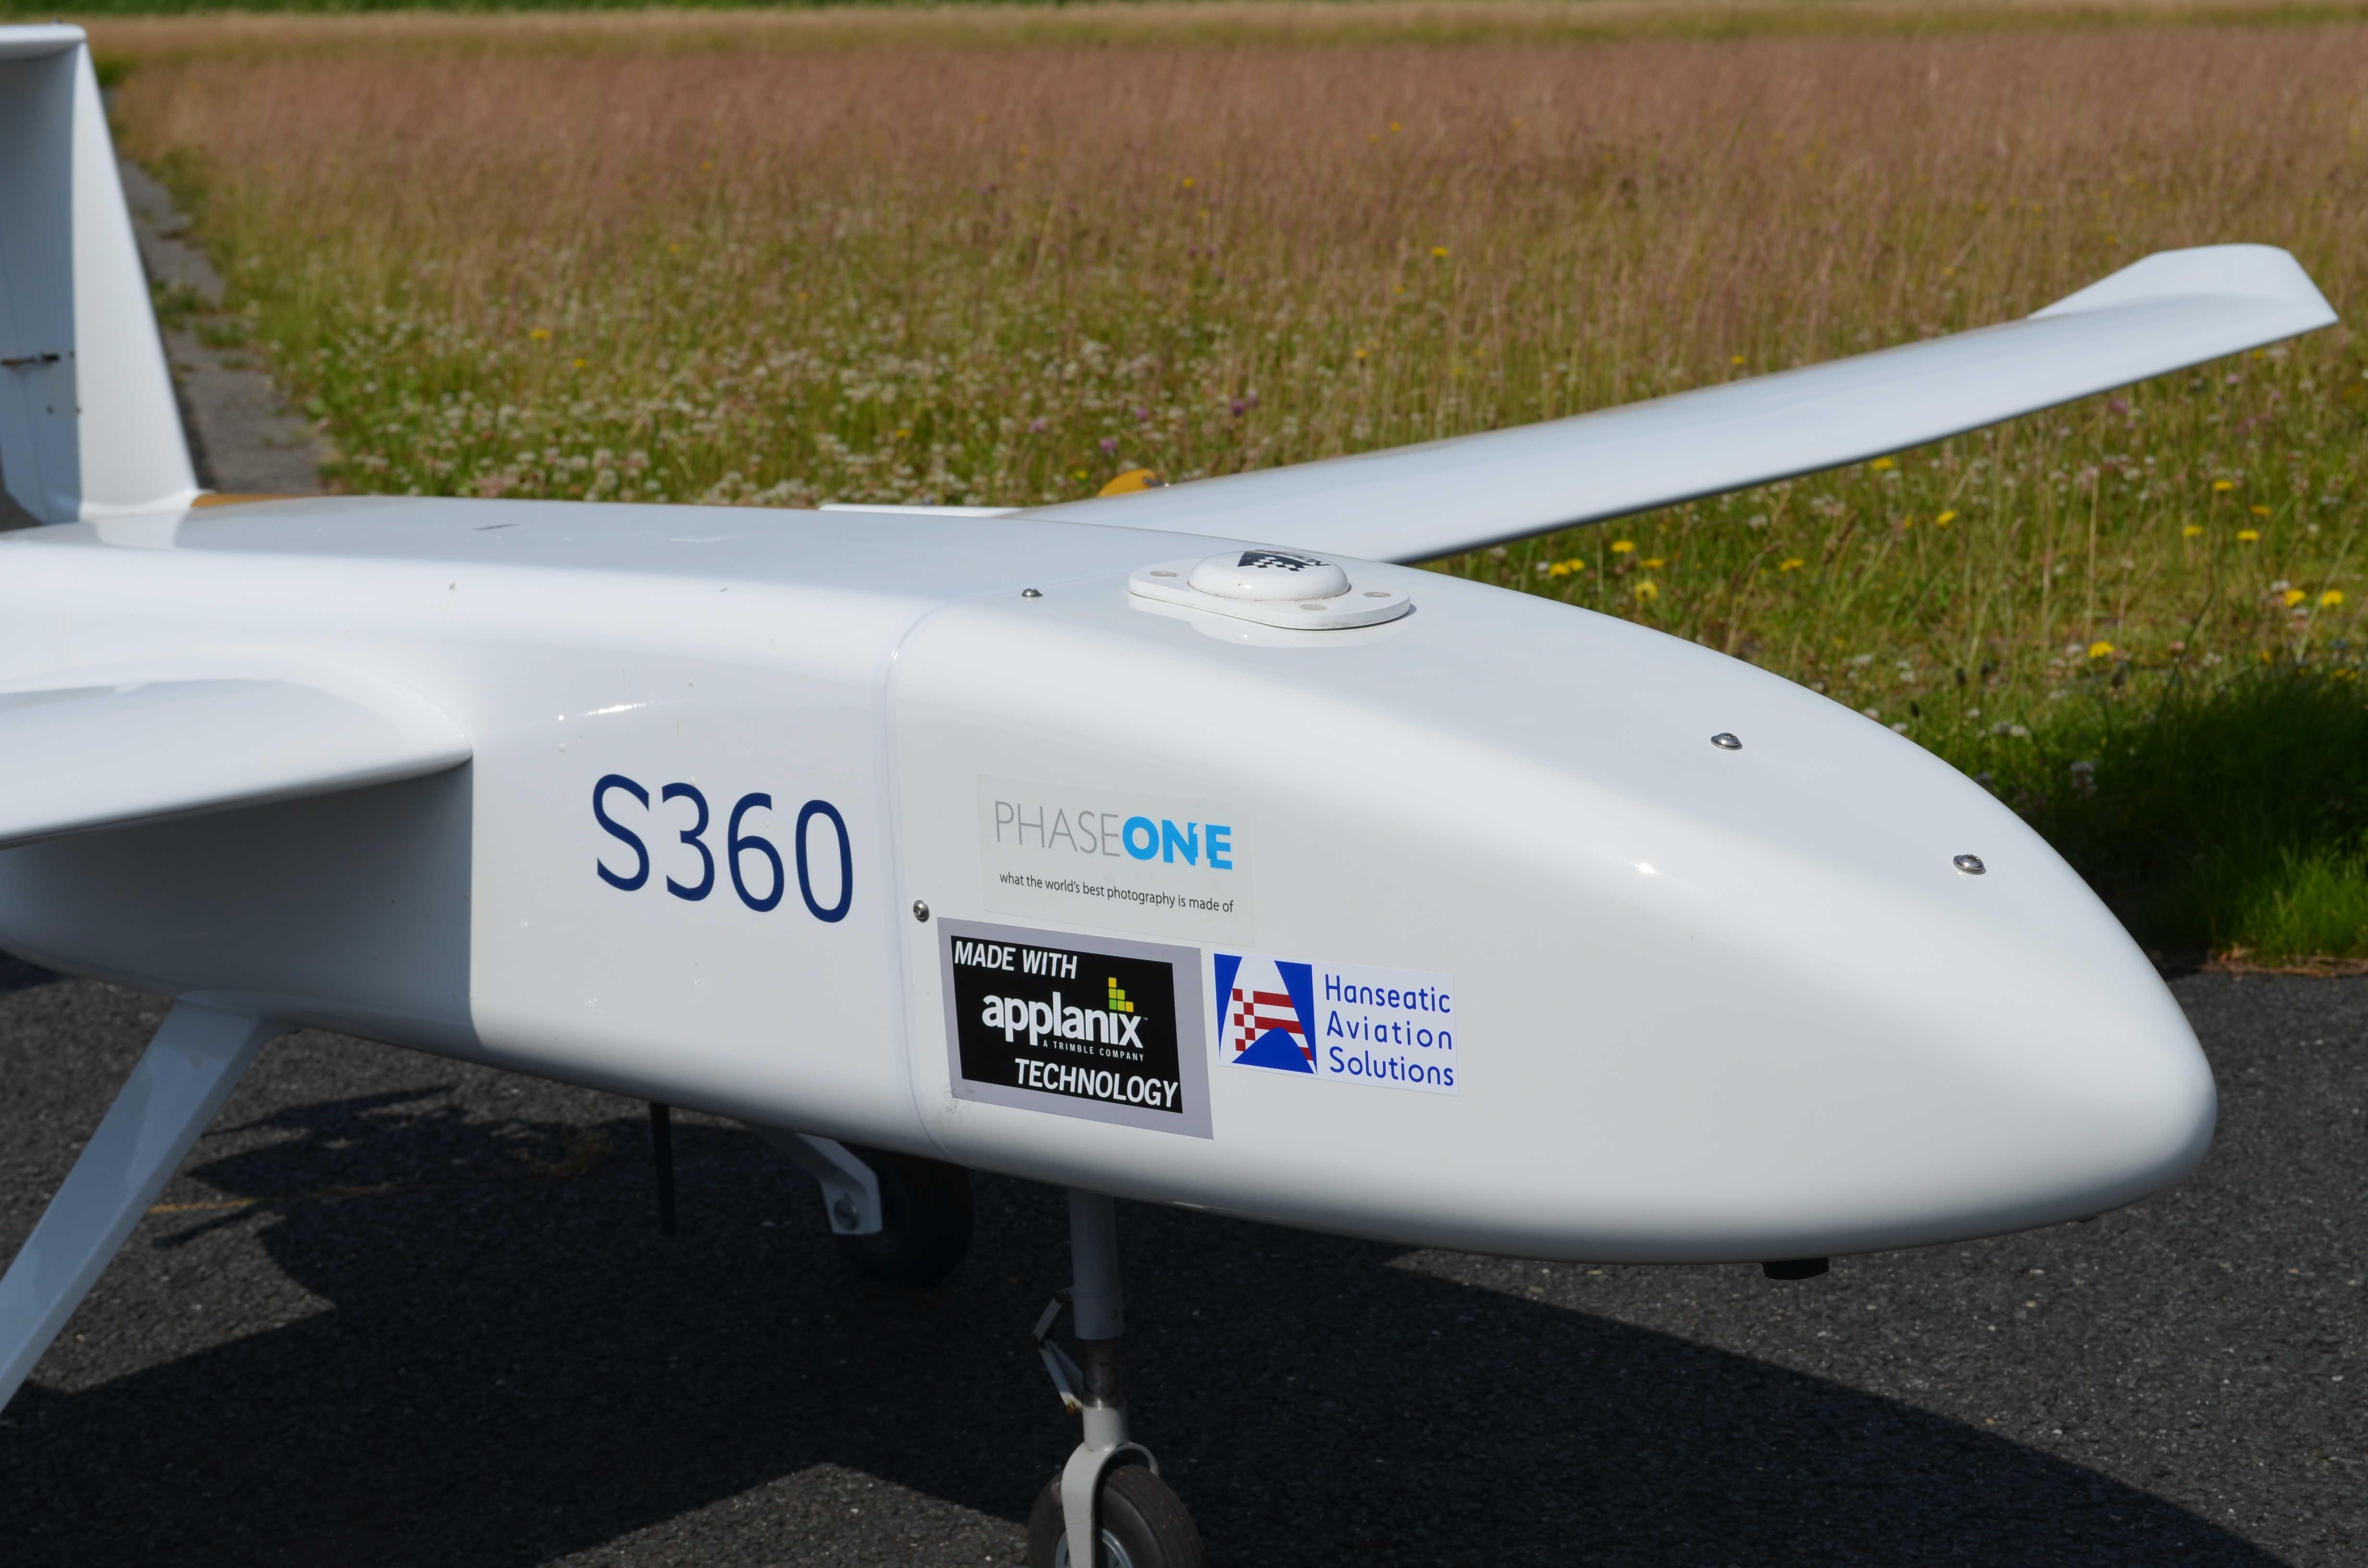 Hanseatic Aviation Solutions - UAV S360 Provides New Payload Option for Aerial Photography with APX-15 UAV